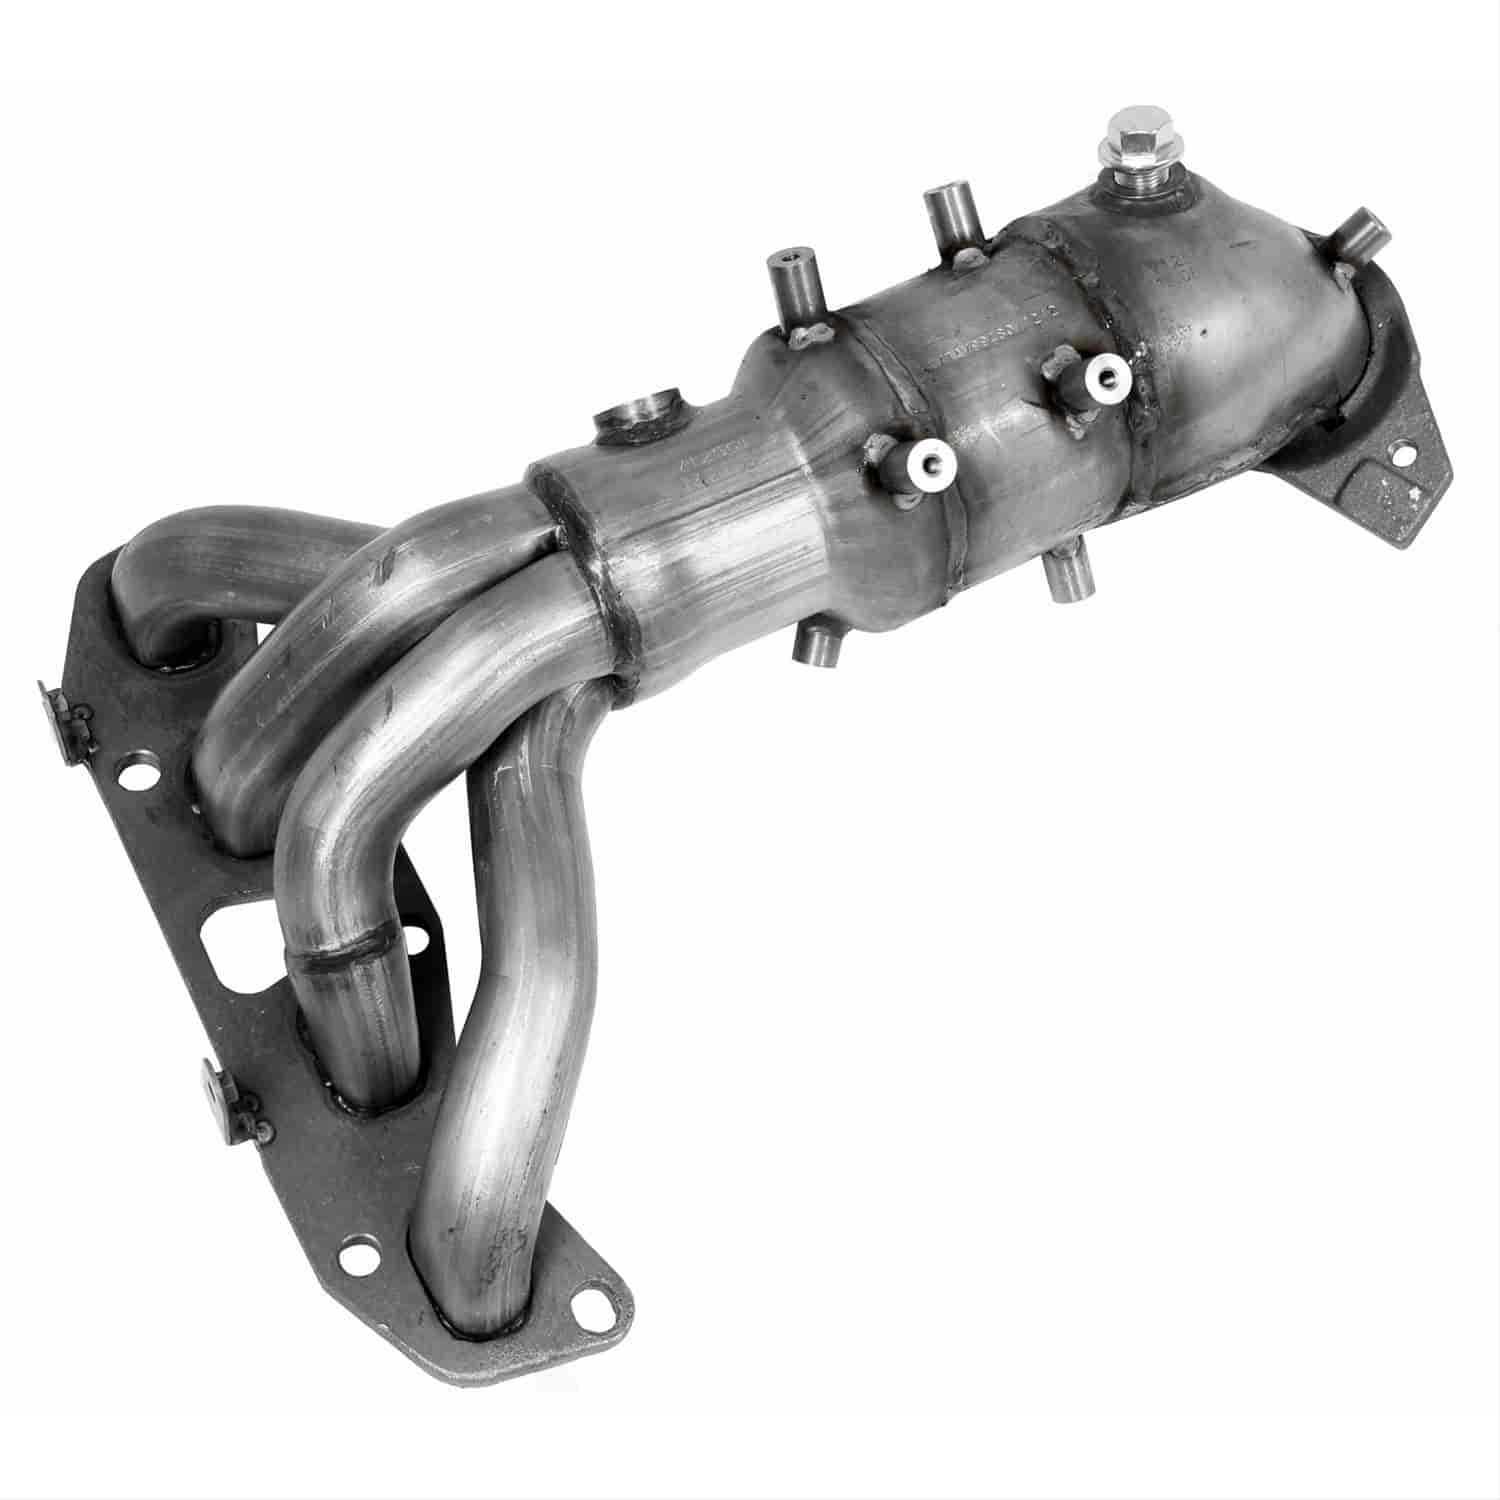 Direct-Fit Catalytic Converter 2002-06 for Nissan fits Altima